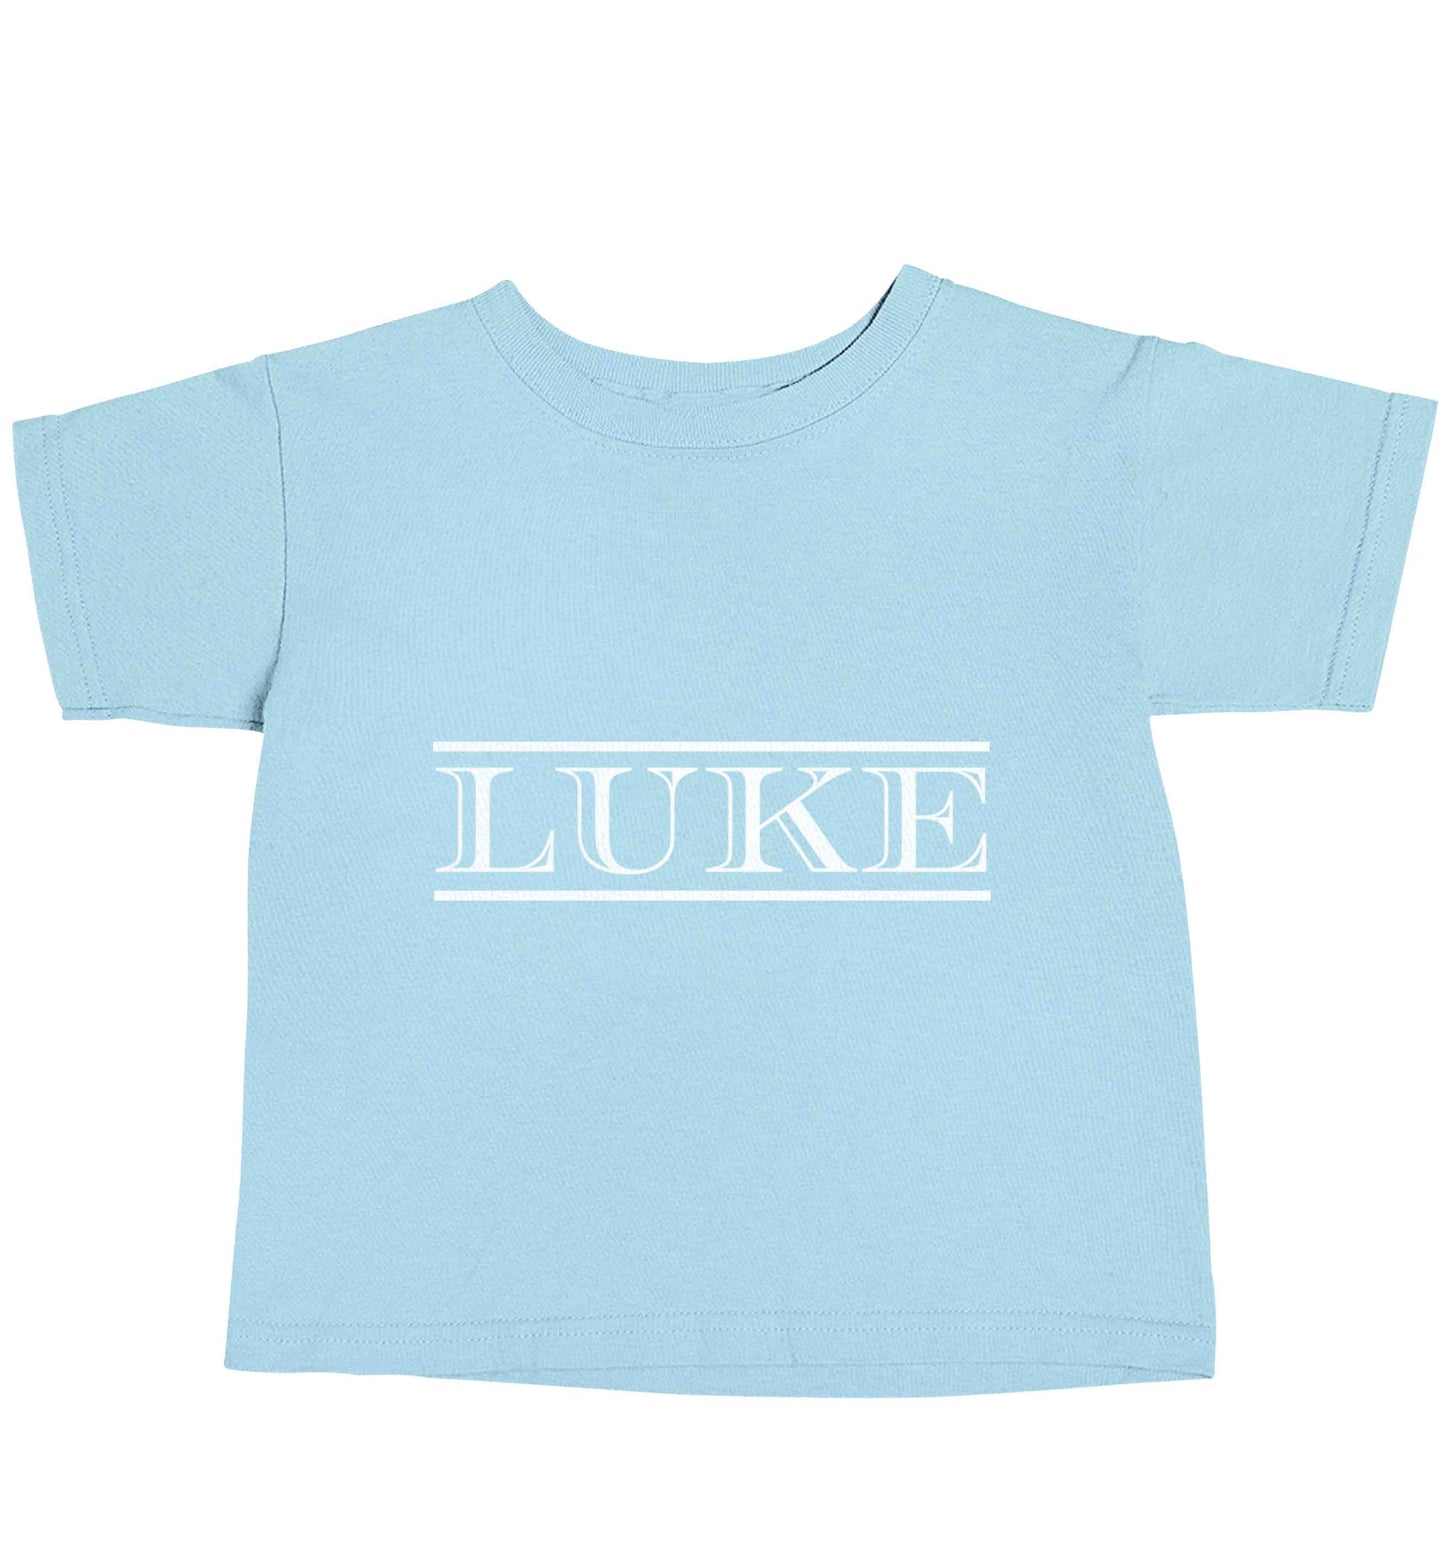 Personalised name light blue baby toddler Tshirt 2 Years